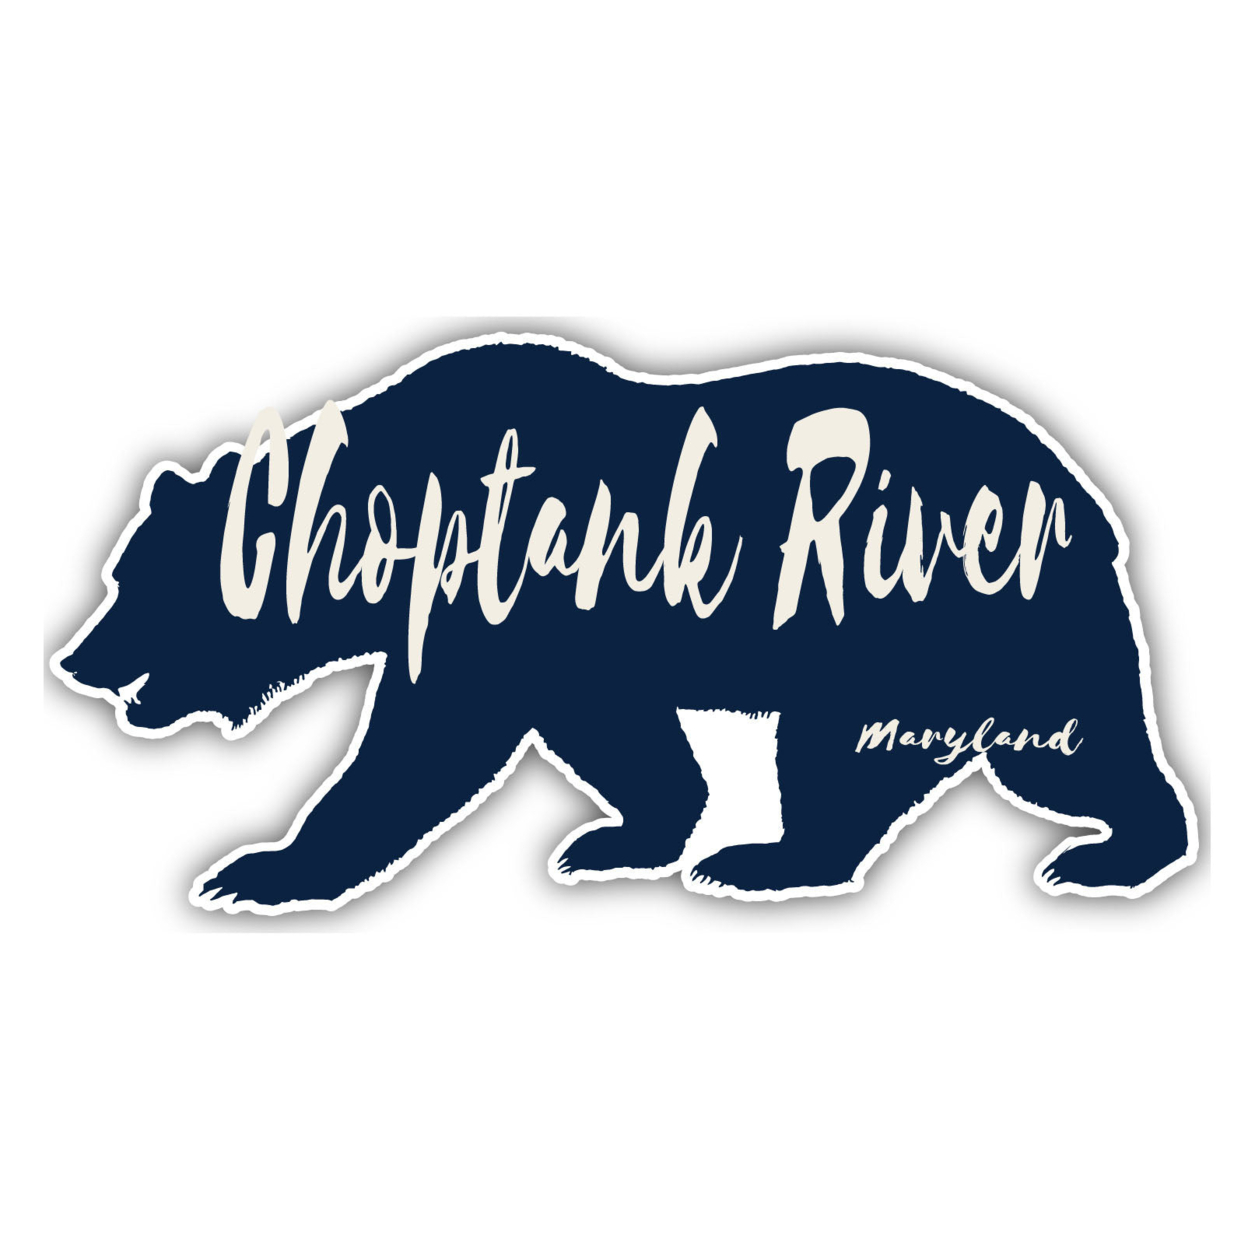 Choptank River Maryland Souvenir Decorative Stickers (Choose Theme And Size) - 4-Pack, 8-Inch, Bear